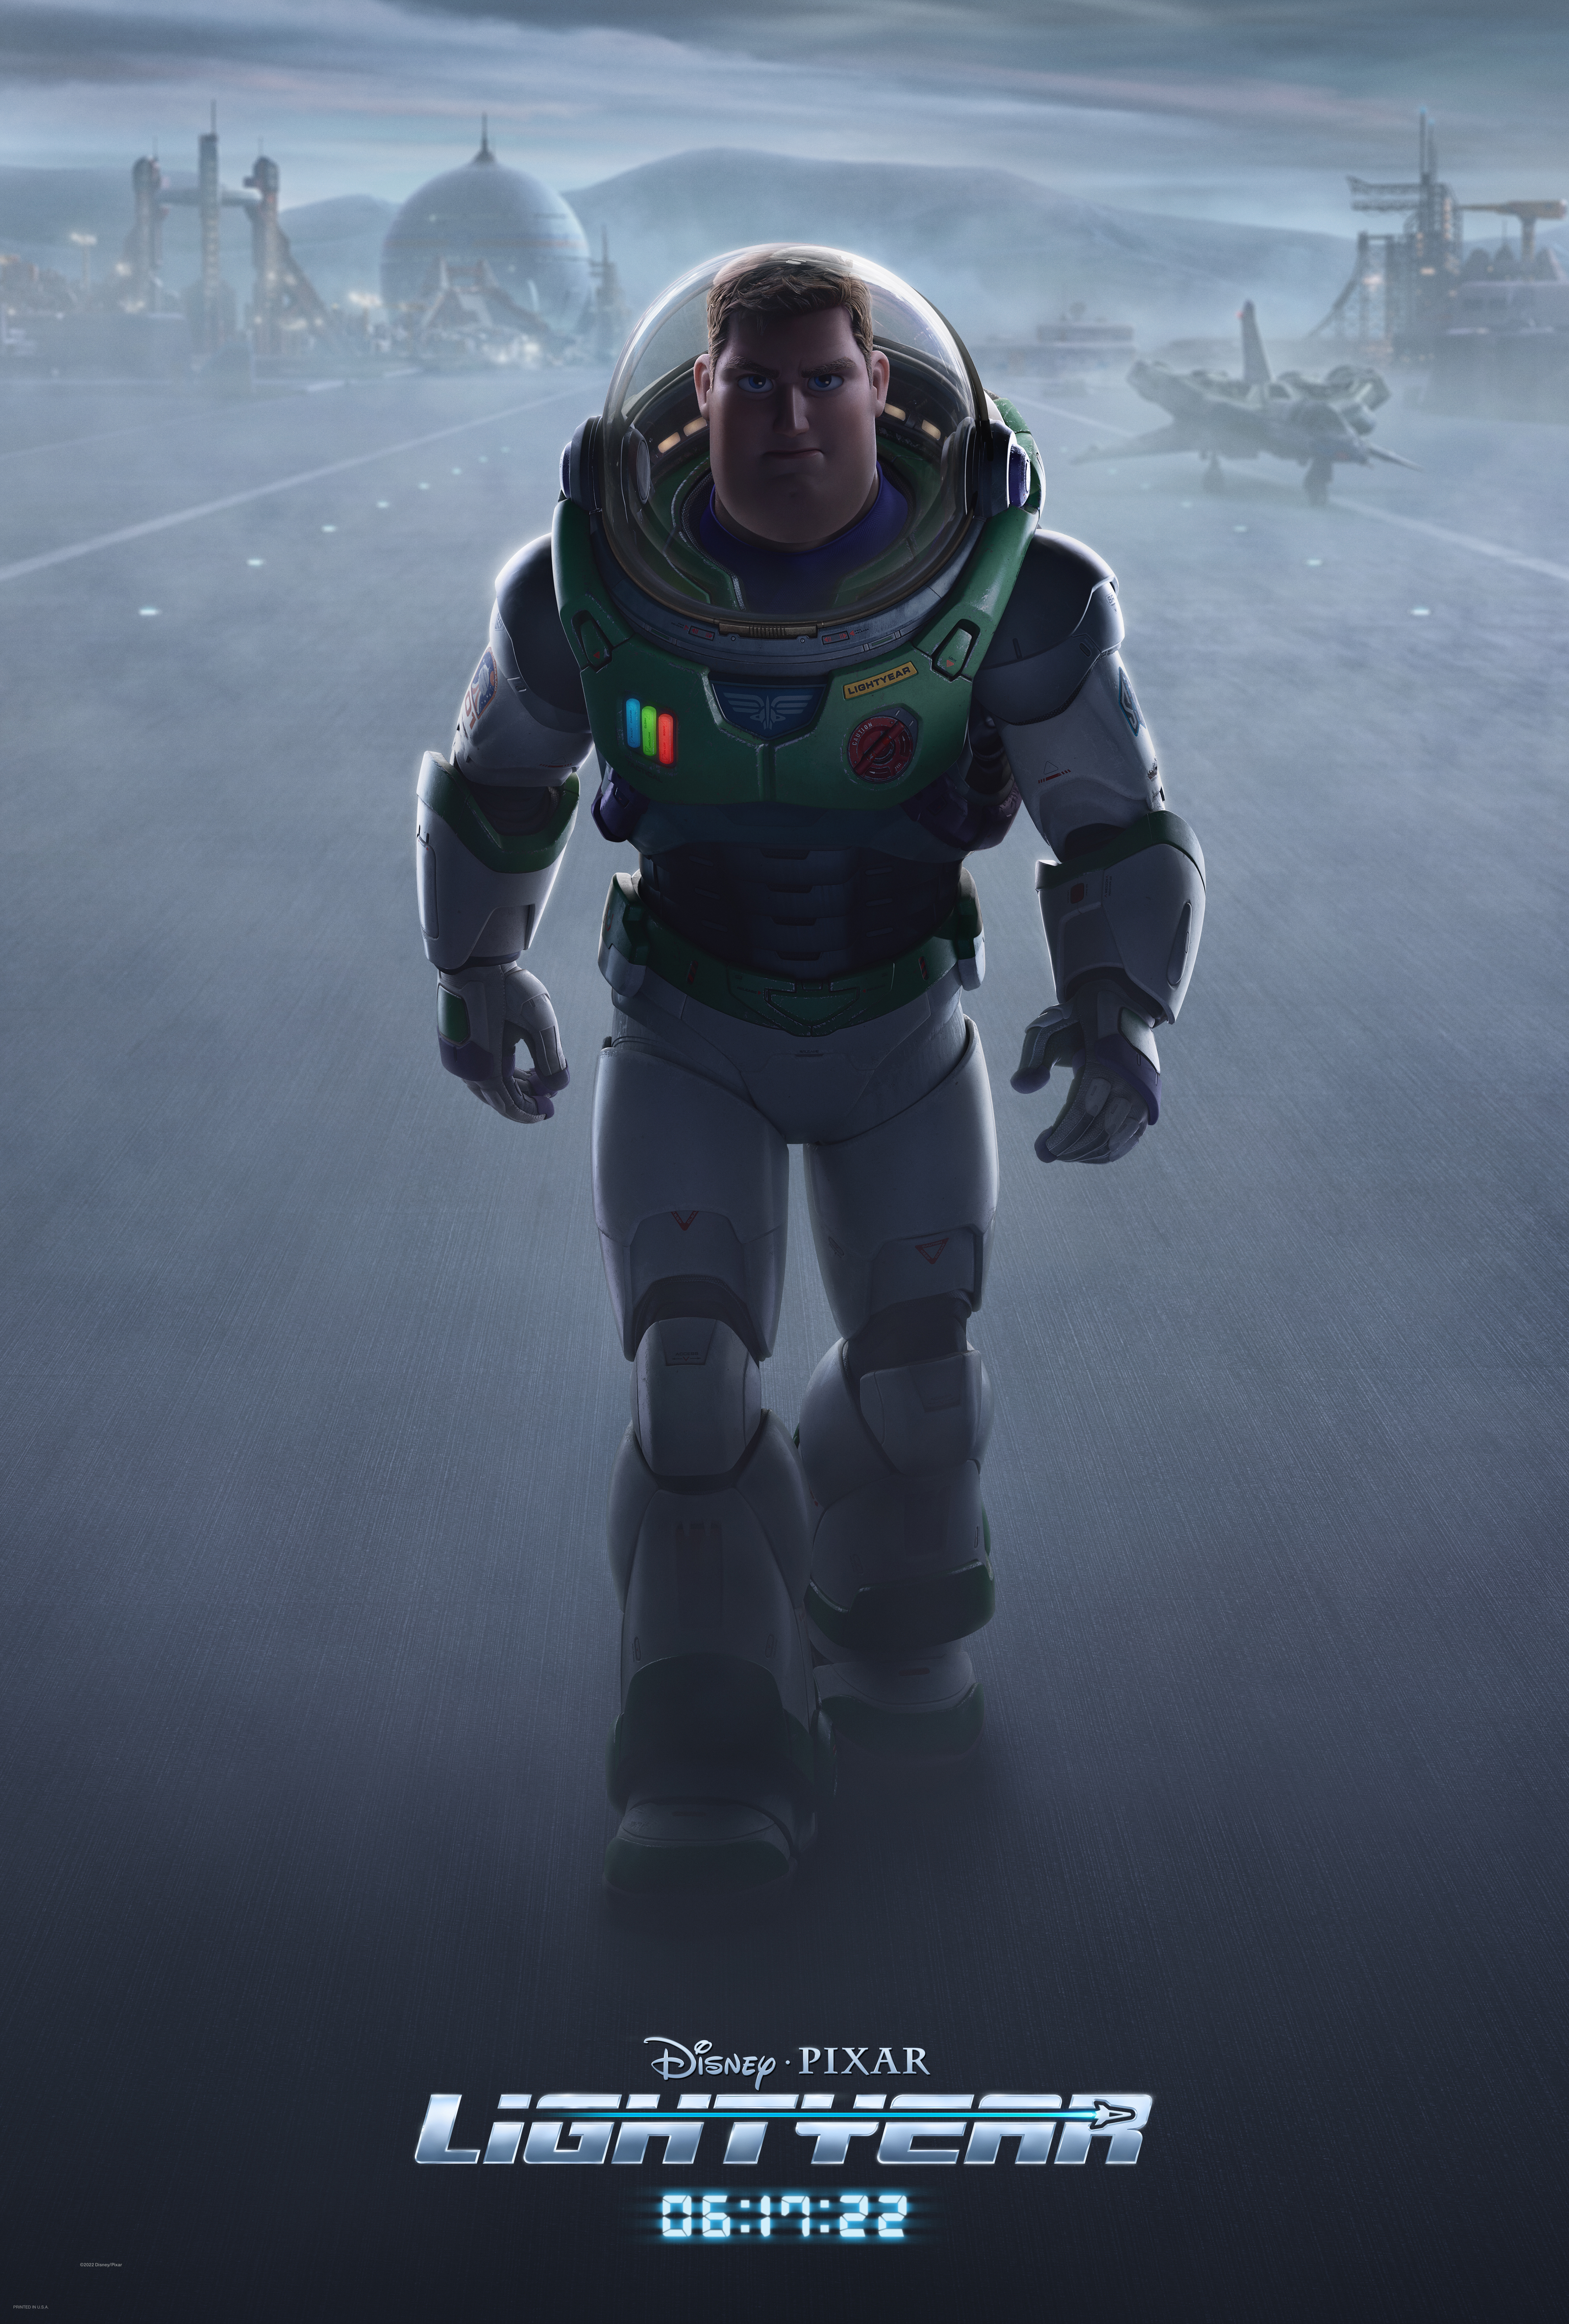 New Movie Trailer and Poster Images for Disney Pixars Lightyear